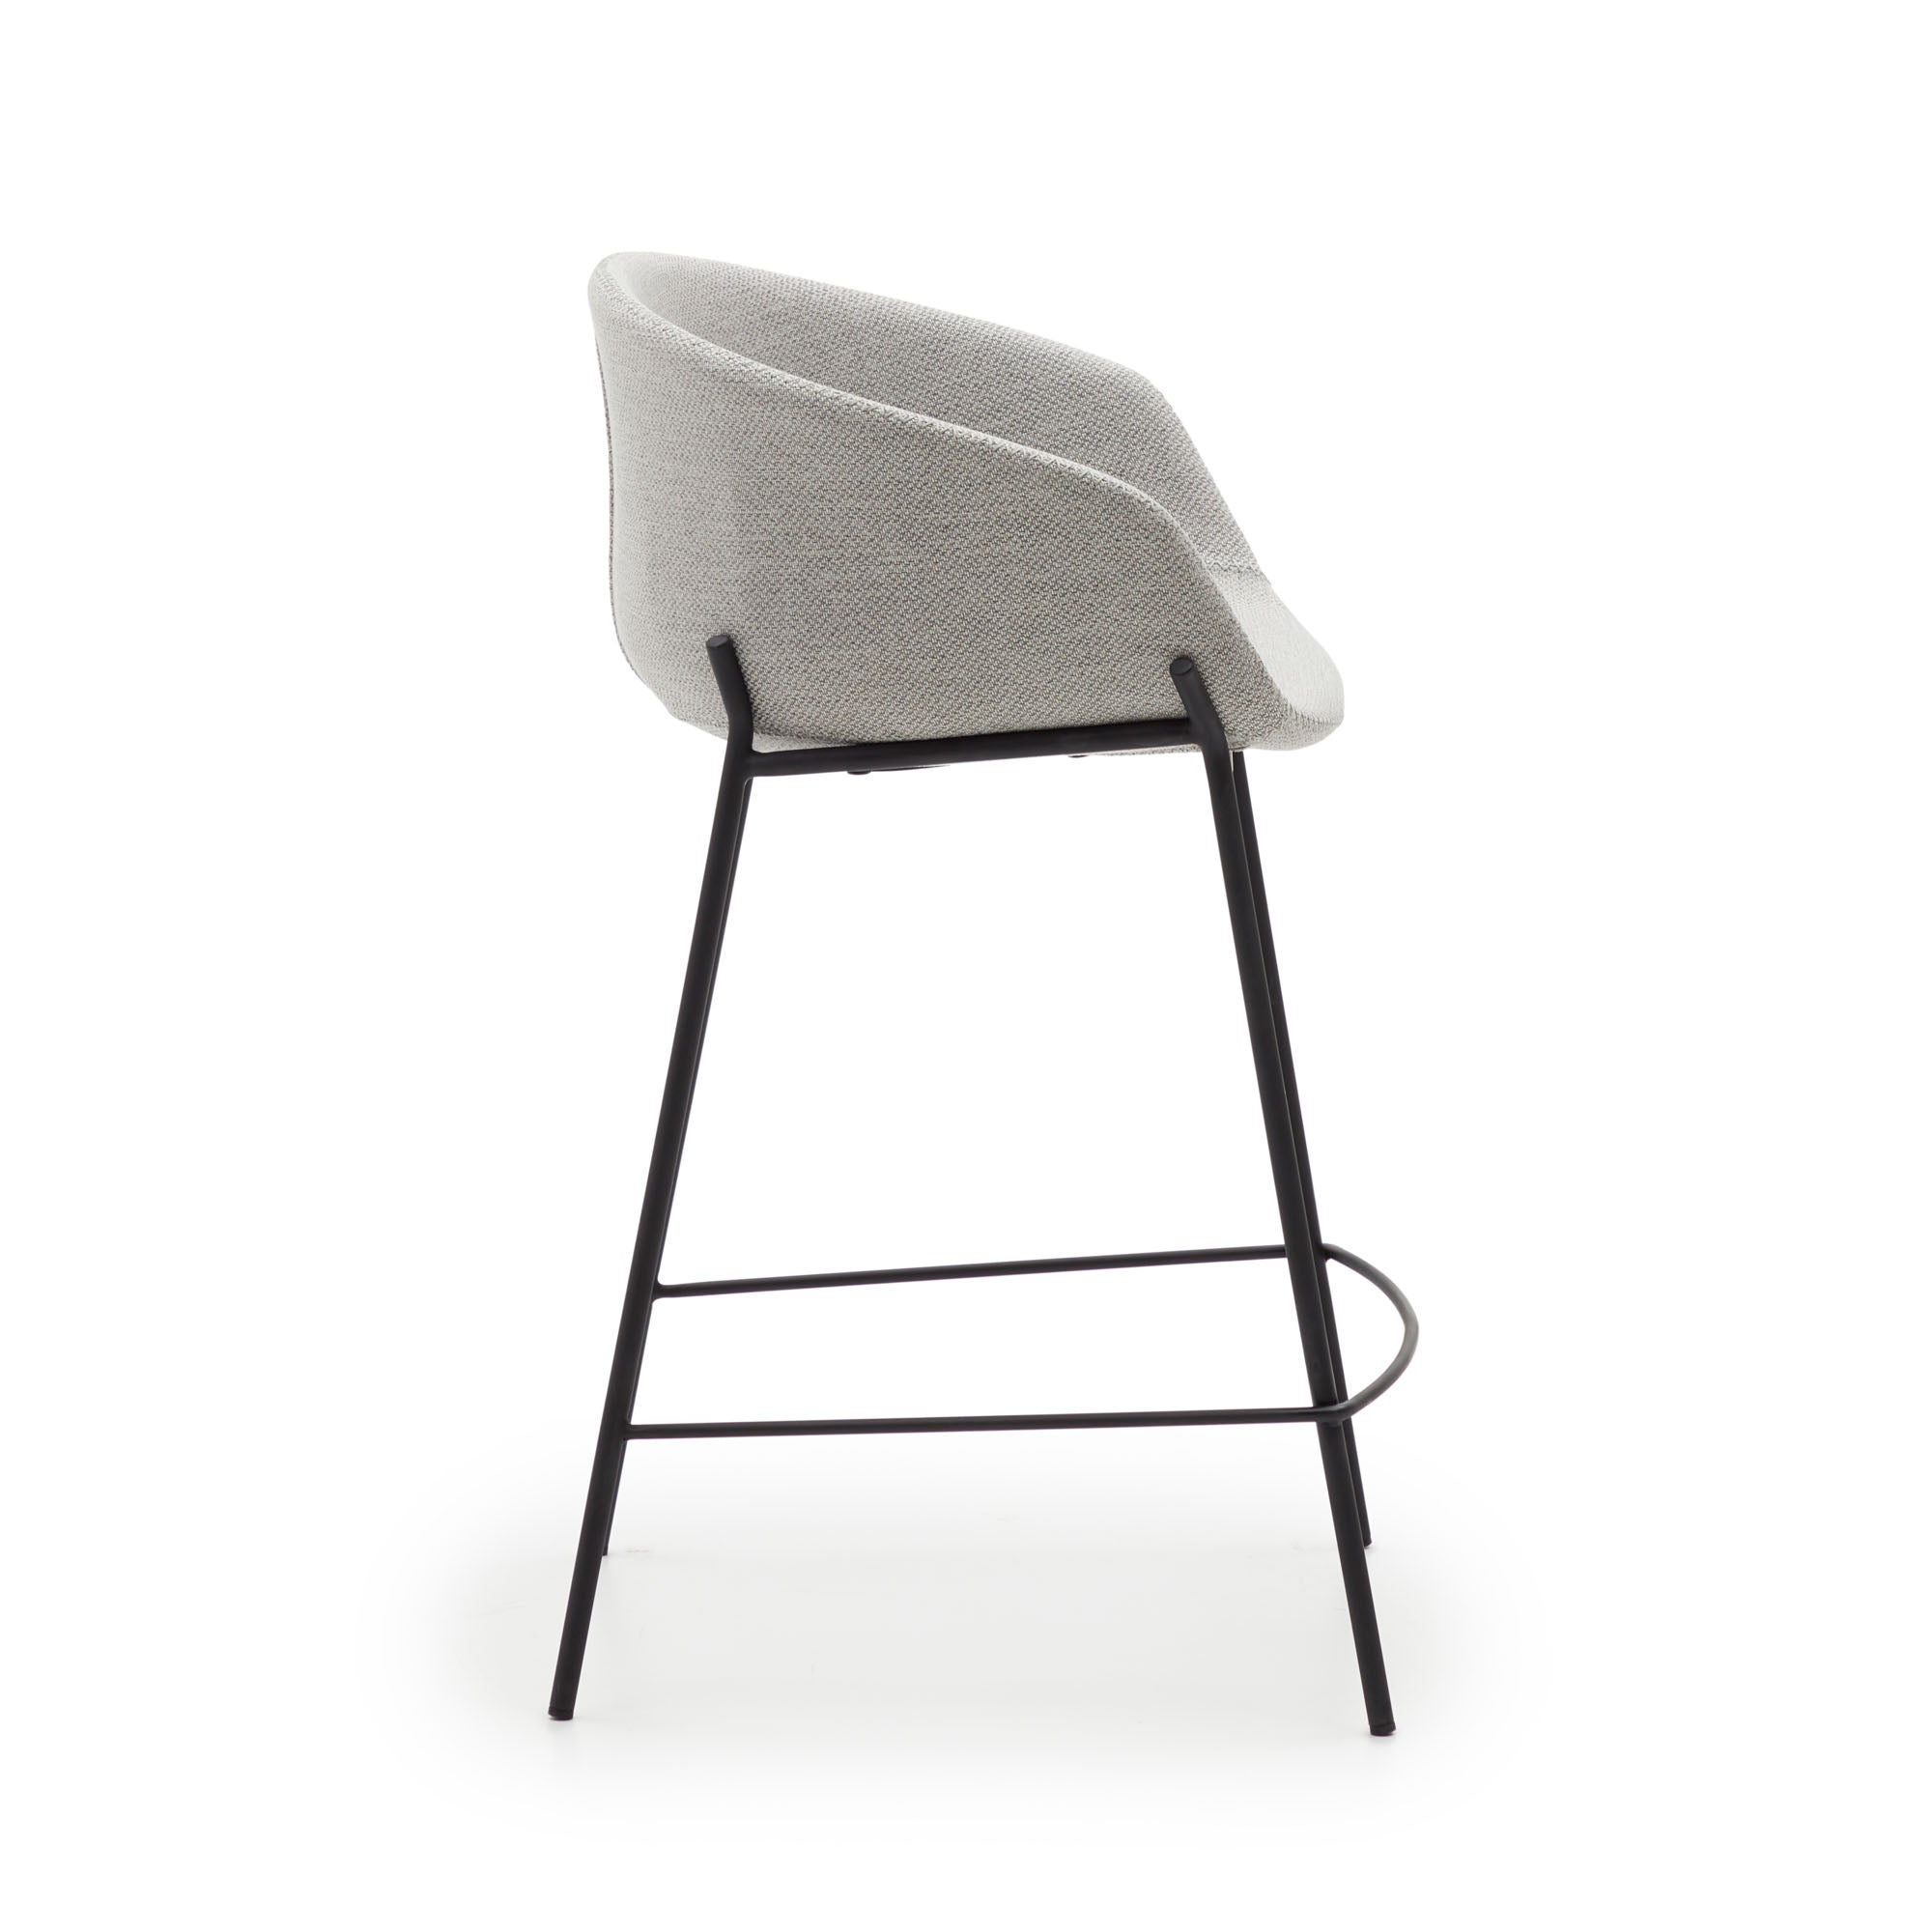 Yvette light grey stool with steel in a black finish, height 65 cm